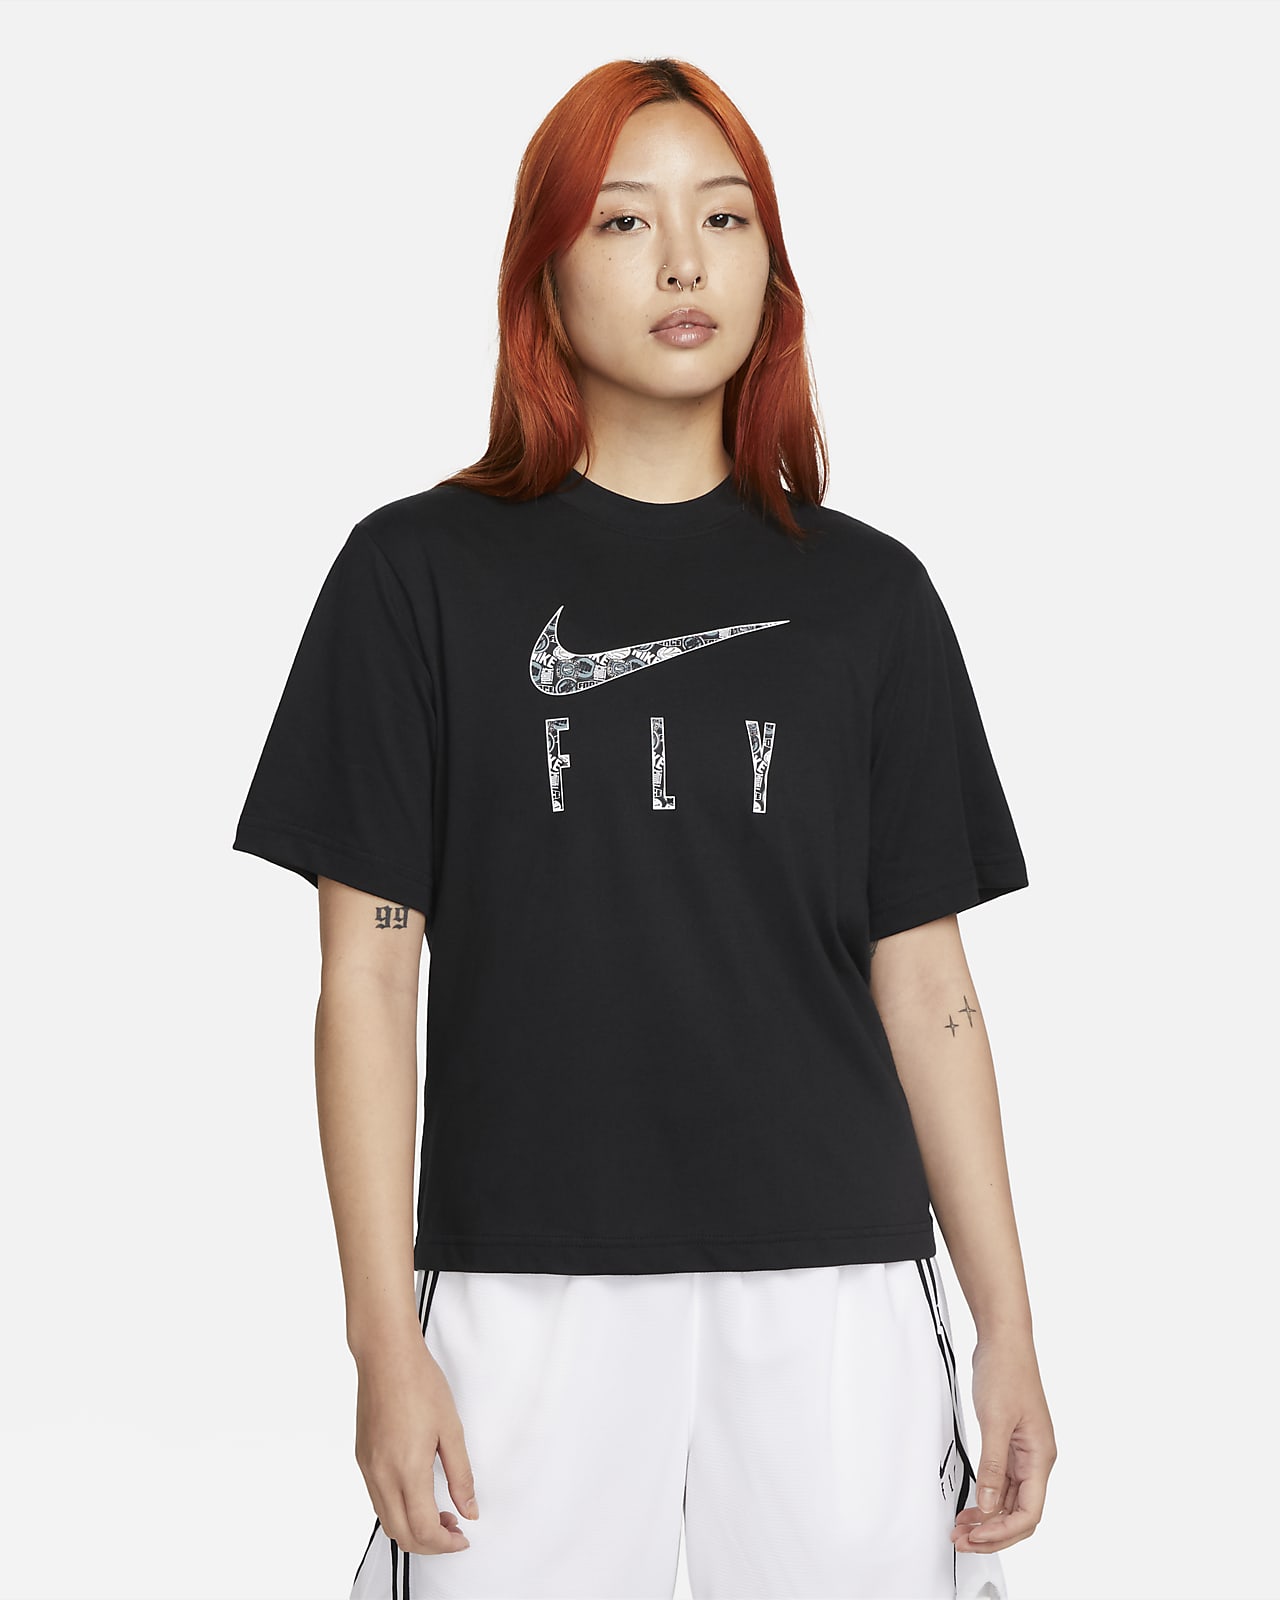 https://static.nike.com/a/images/t_PDP_1280_v1/f_auto,q_auto:eco/d1379f3b-2ce7-496f-8442-83ddb6c6f661/dri-fit-swoosh-fly-t-shirt-LcsRwS.png